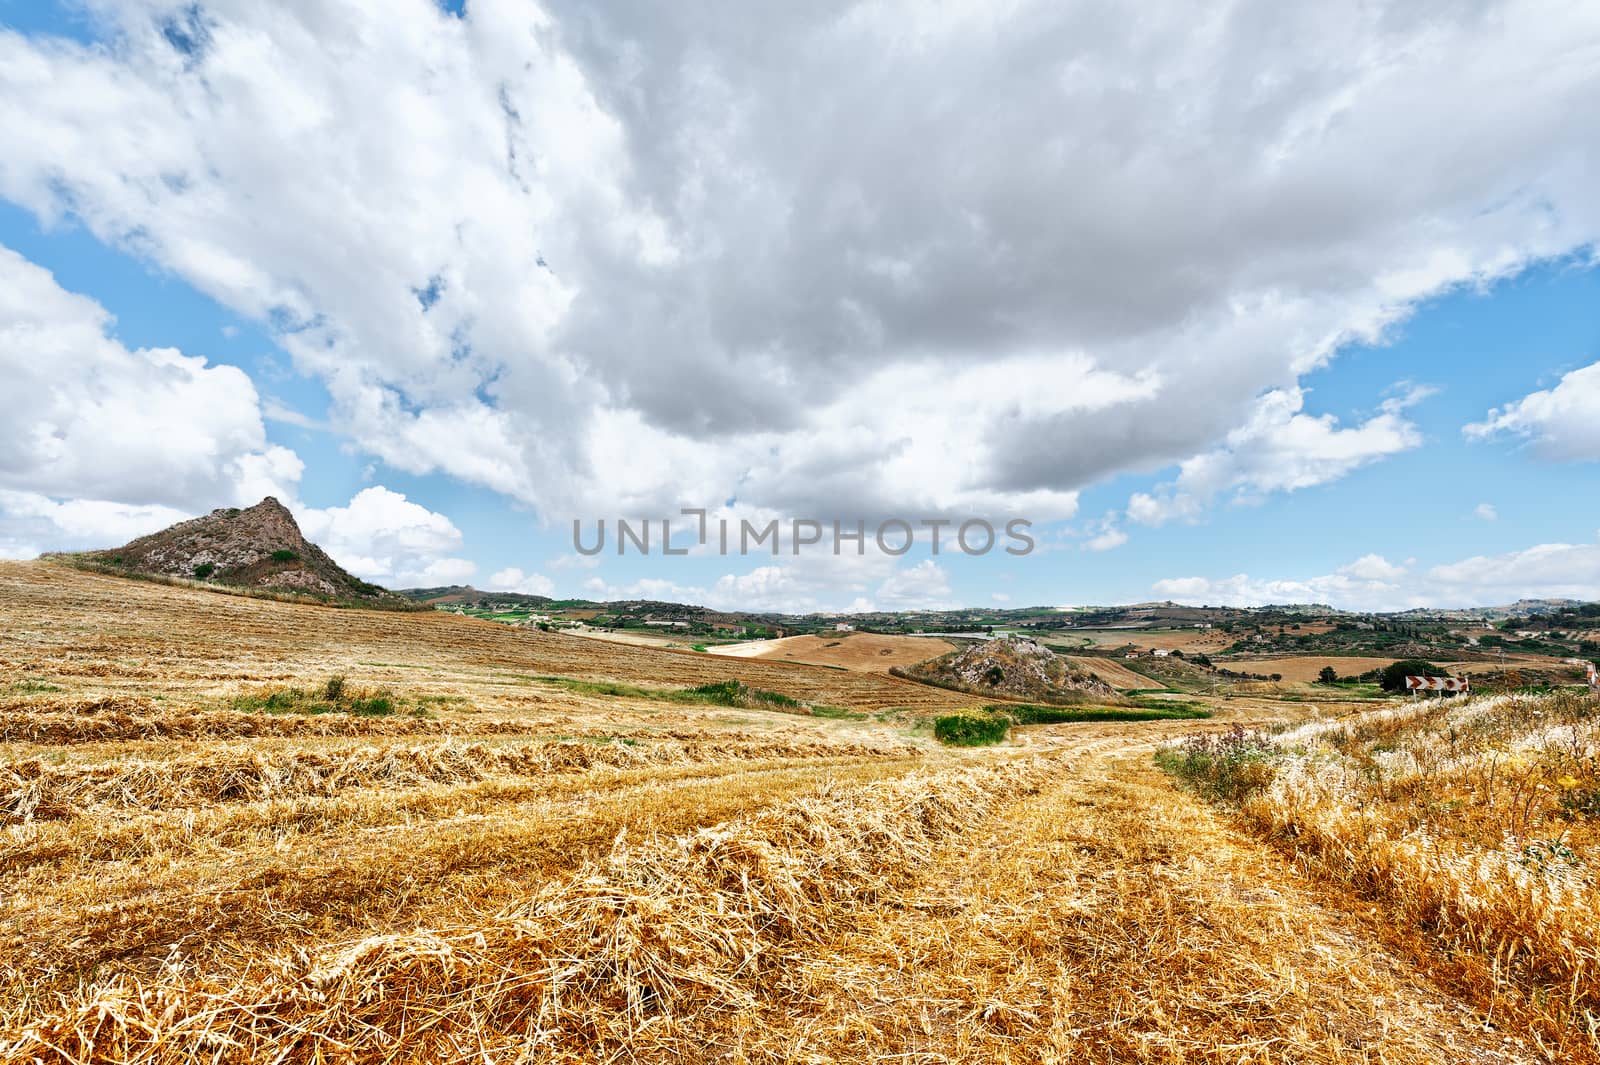 Mown Wheat Field on the Hill in Sicily, Italy